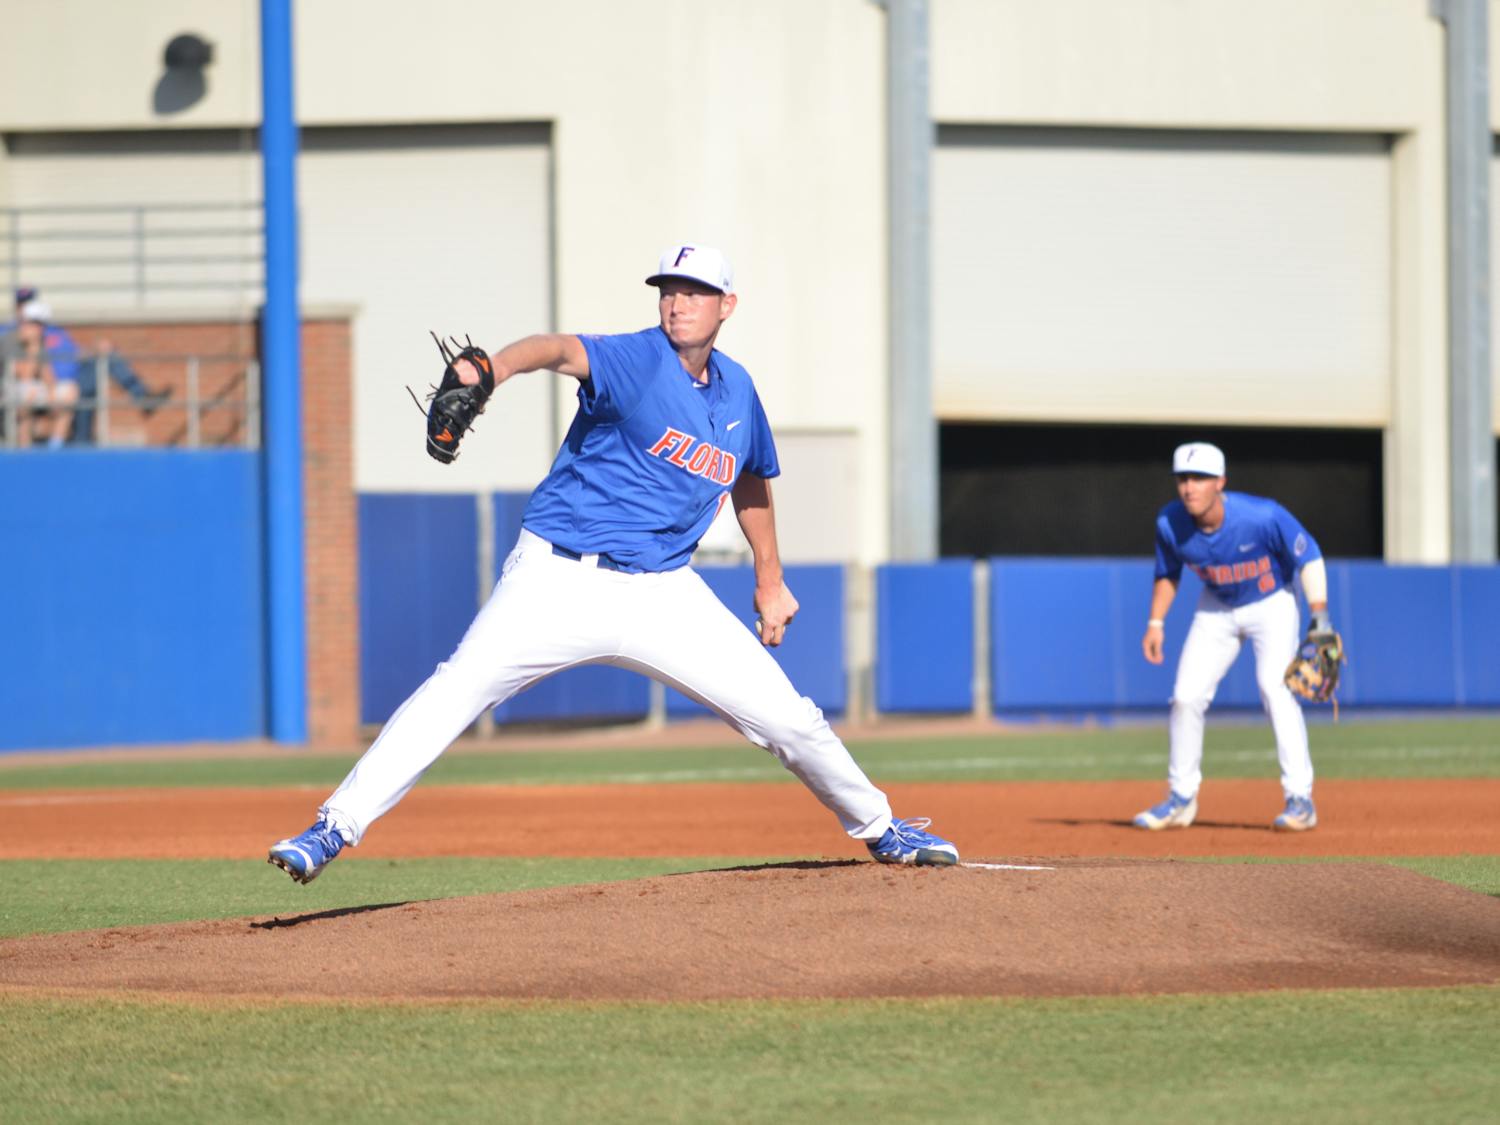 UF's A.J. Puk pitches during Florida's 8-4 win on Feb. 20, 2016, at McKethan Stadium.